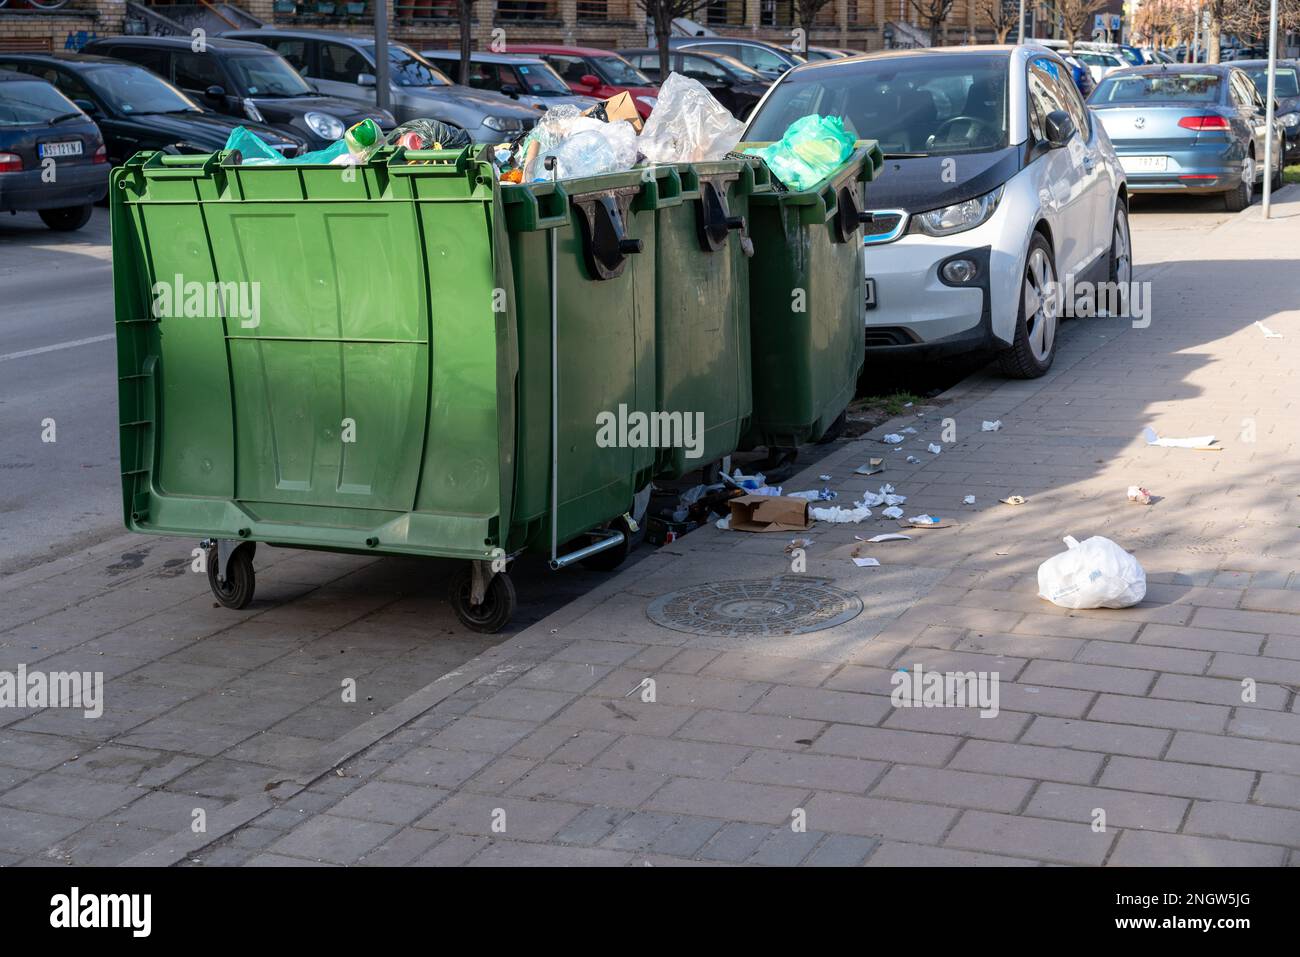 Overflowing trash cans on street in city. Problem rubbish disposal. Stock Photo